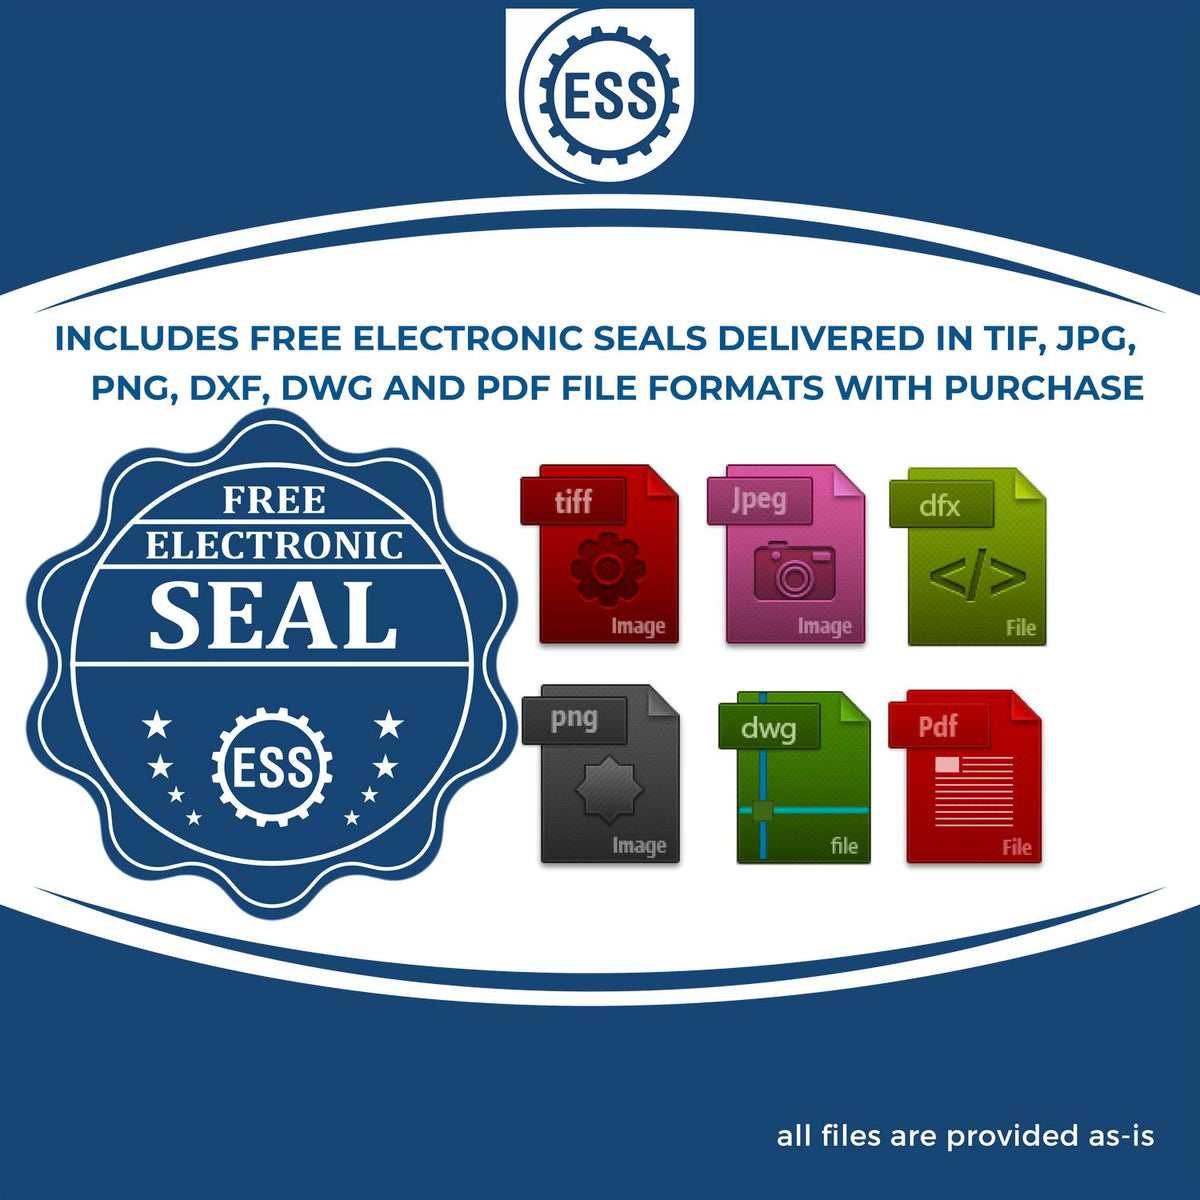 An infographic for the free electronic seal for the Handheld Illinois Architect Seal Embosser illustrating the different file type icons such as DXF, DWG, TIF, JPG and PNG.